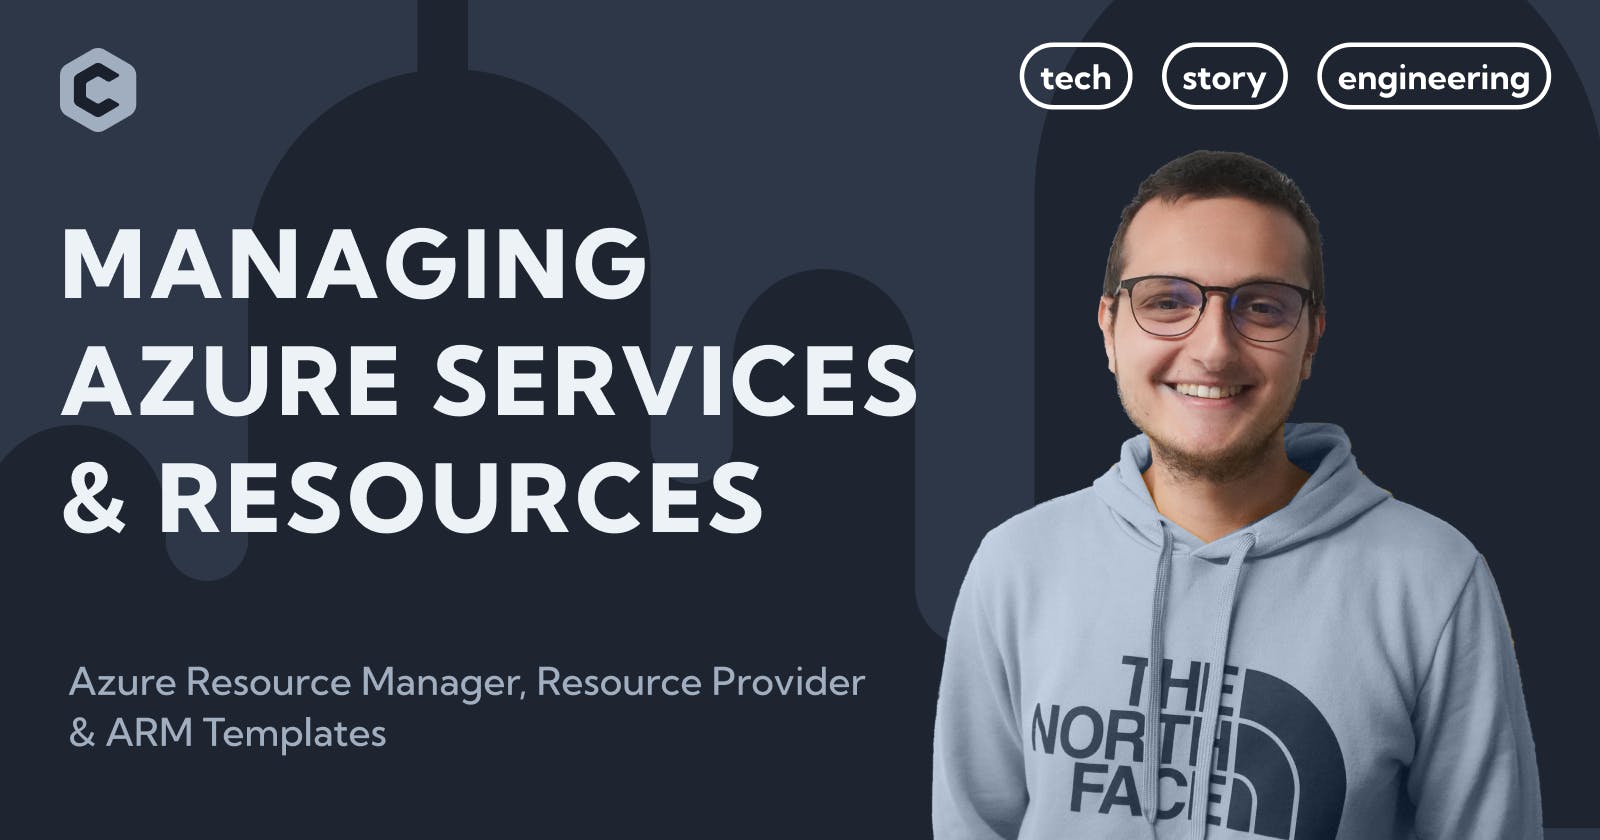 Managing Azure Services & Resources